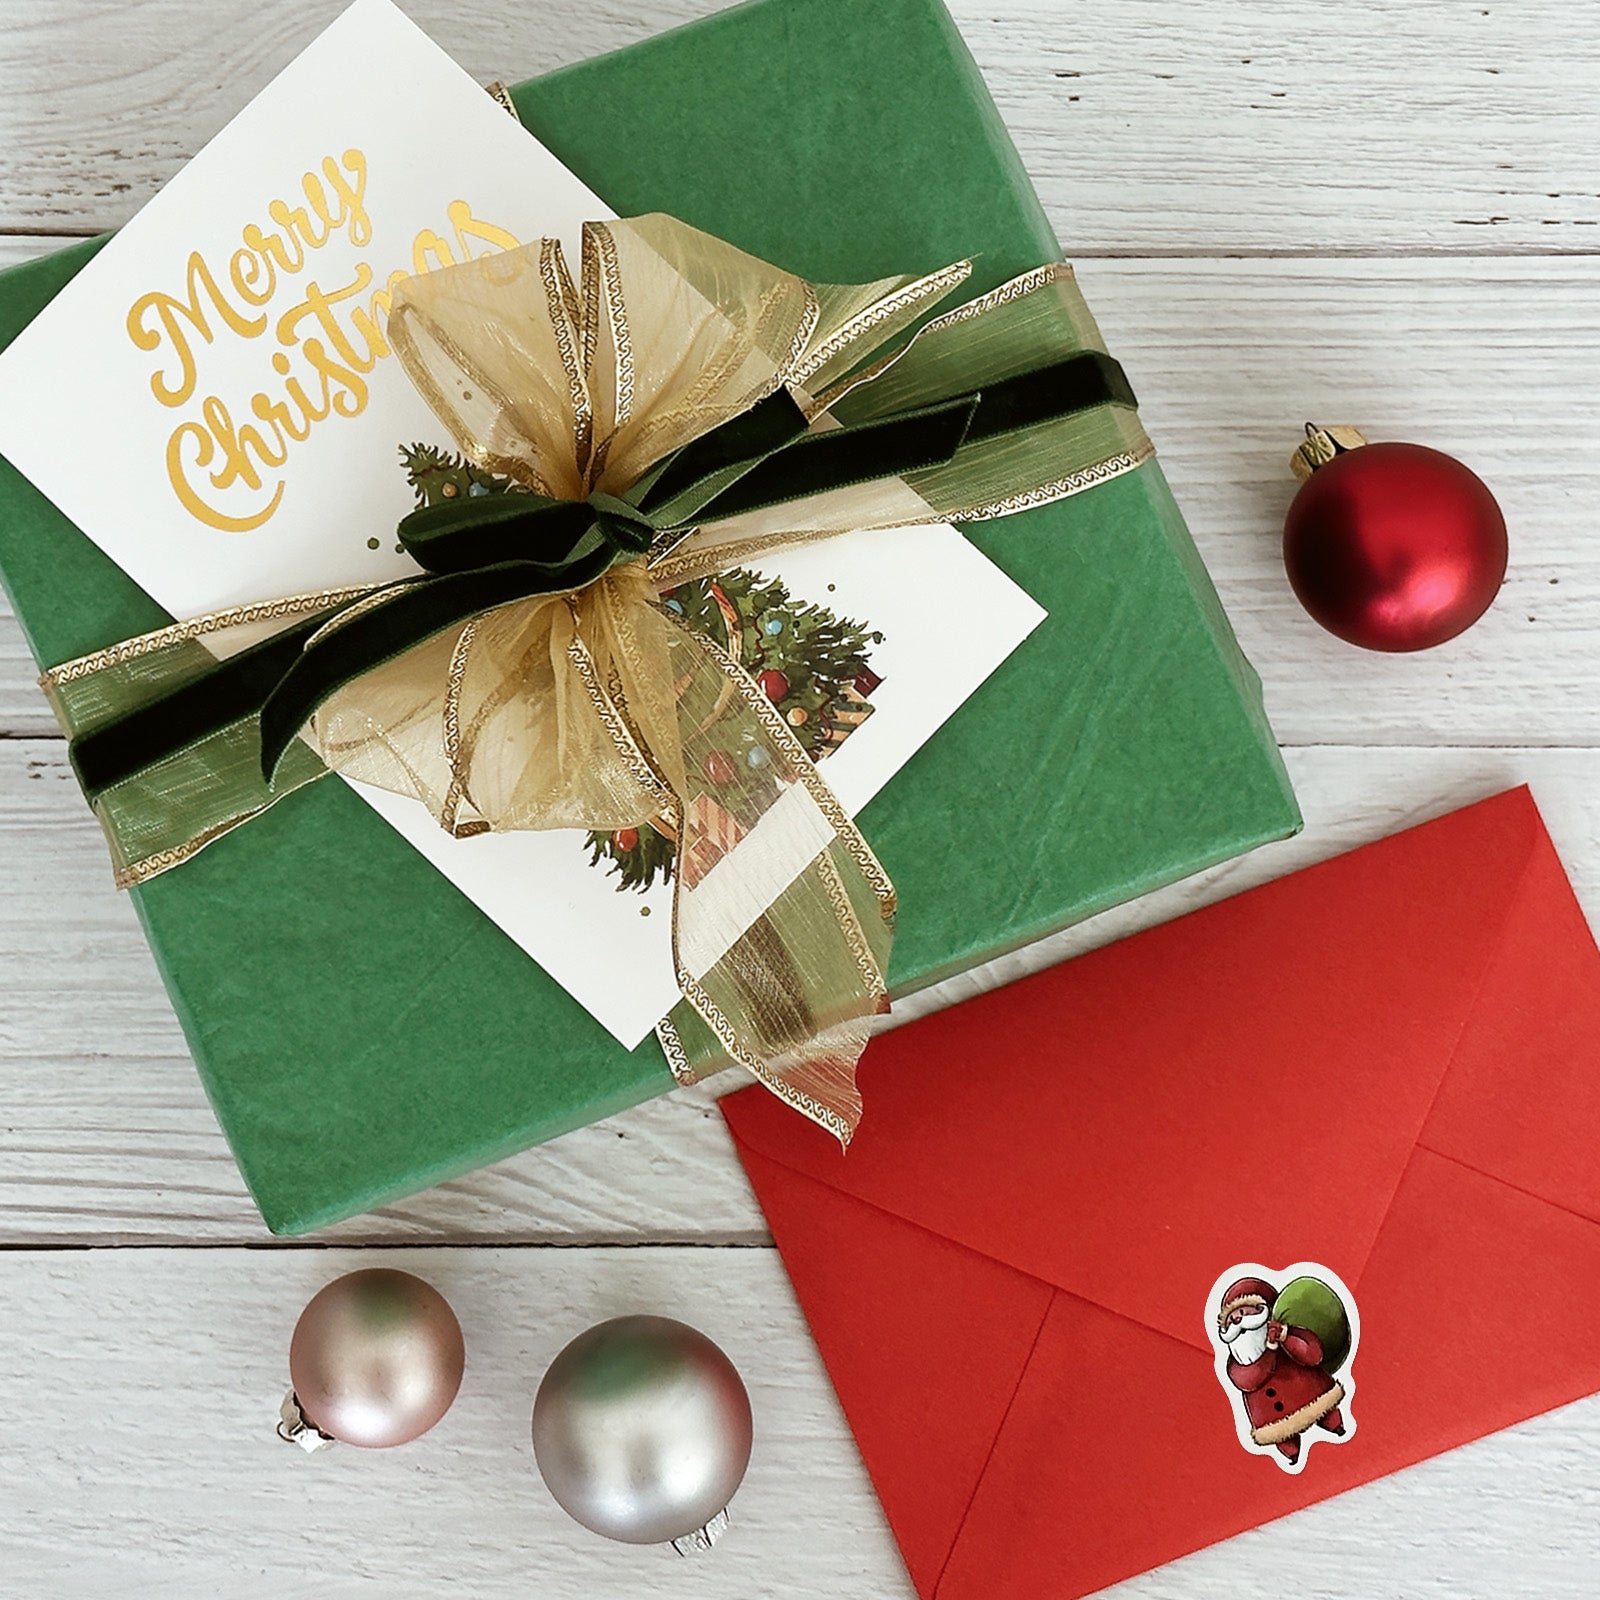 Wrapables Blank Gold Foil Christmas Greeting Cards with Envelopes & Stickers for Holidays, Friends, Family (Set of 24)